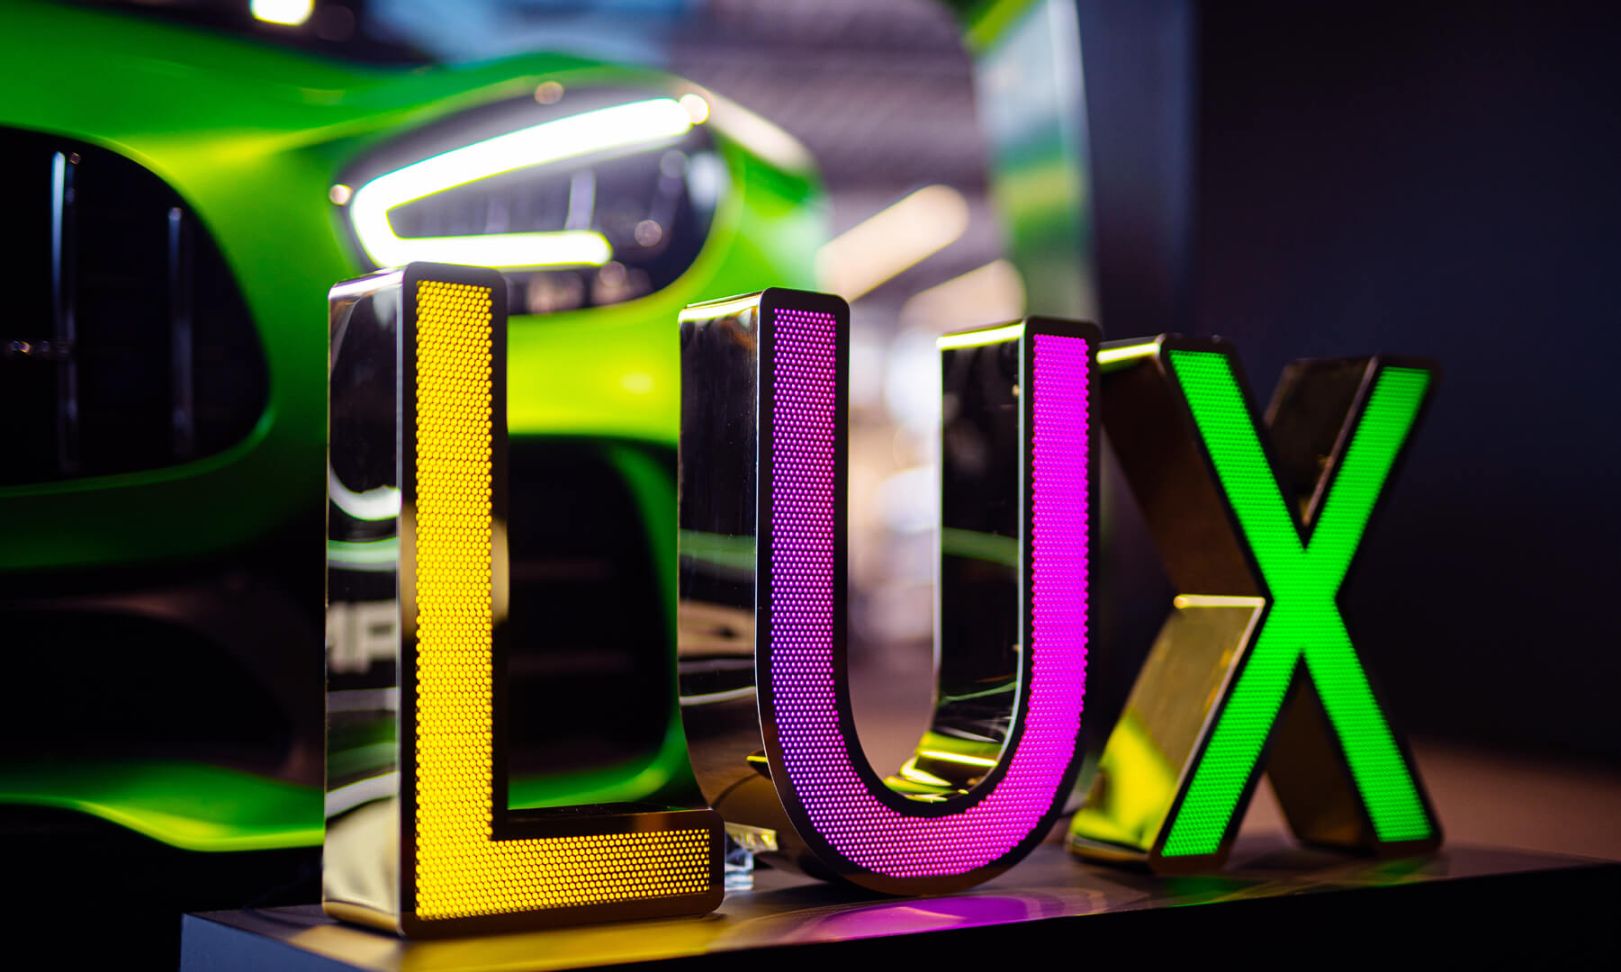 LUX perforated stainless steel letters - LUX inscription made of perforated stainless steel sheet, illuminated with LED in three colors, on the background of Mercedes